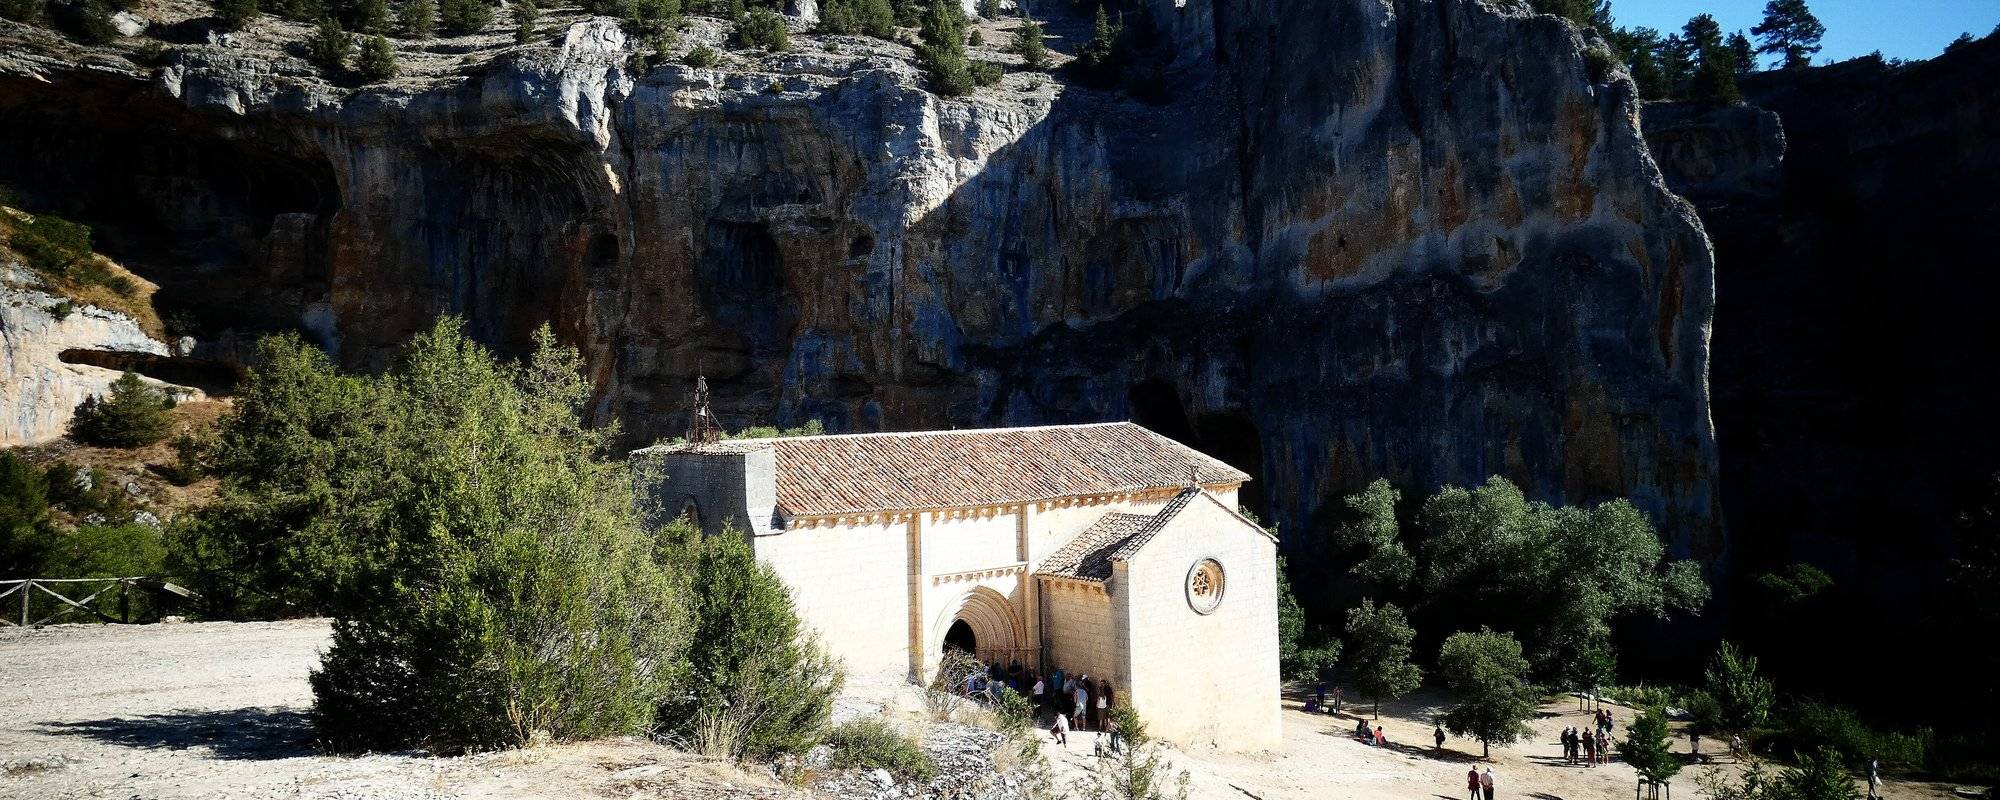 Spanish cultural traditions: the Lobos River Canyon and the pilgrimage of San Bartolomé and the Virgen de la Salud 2019